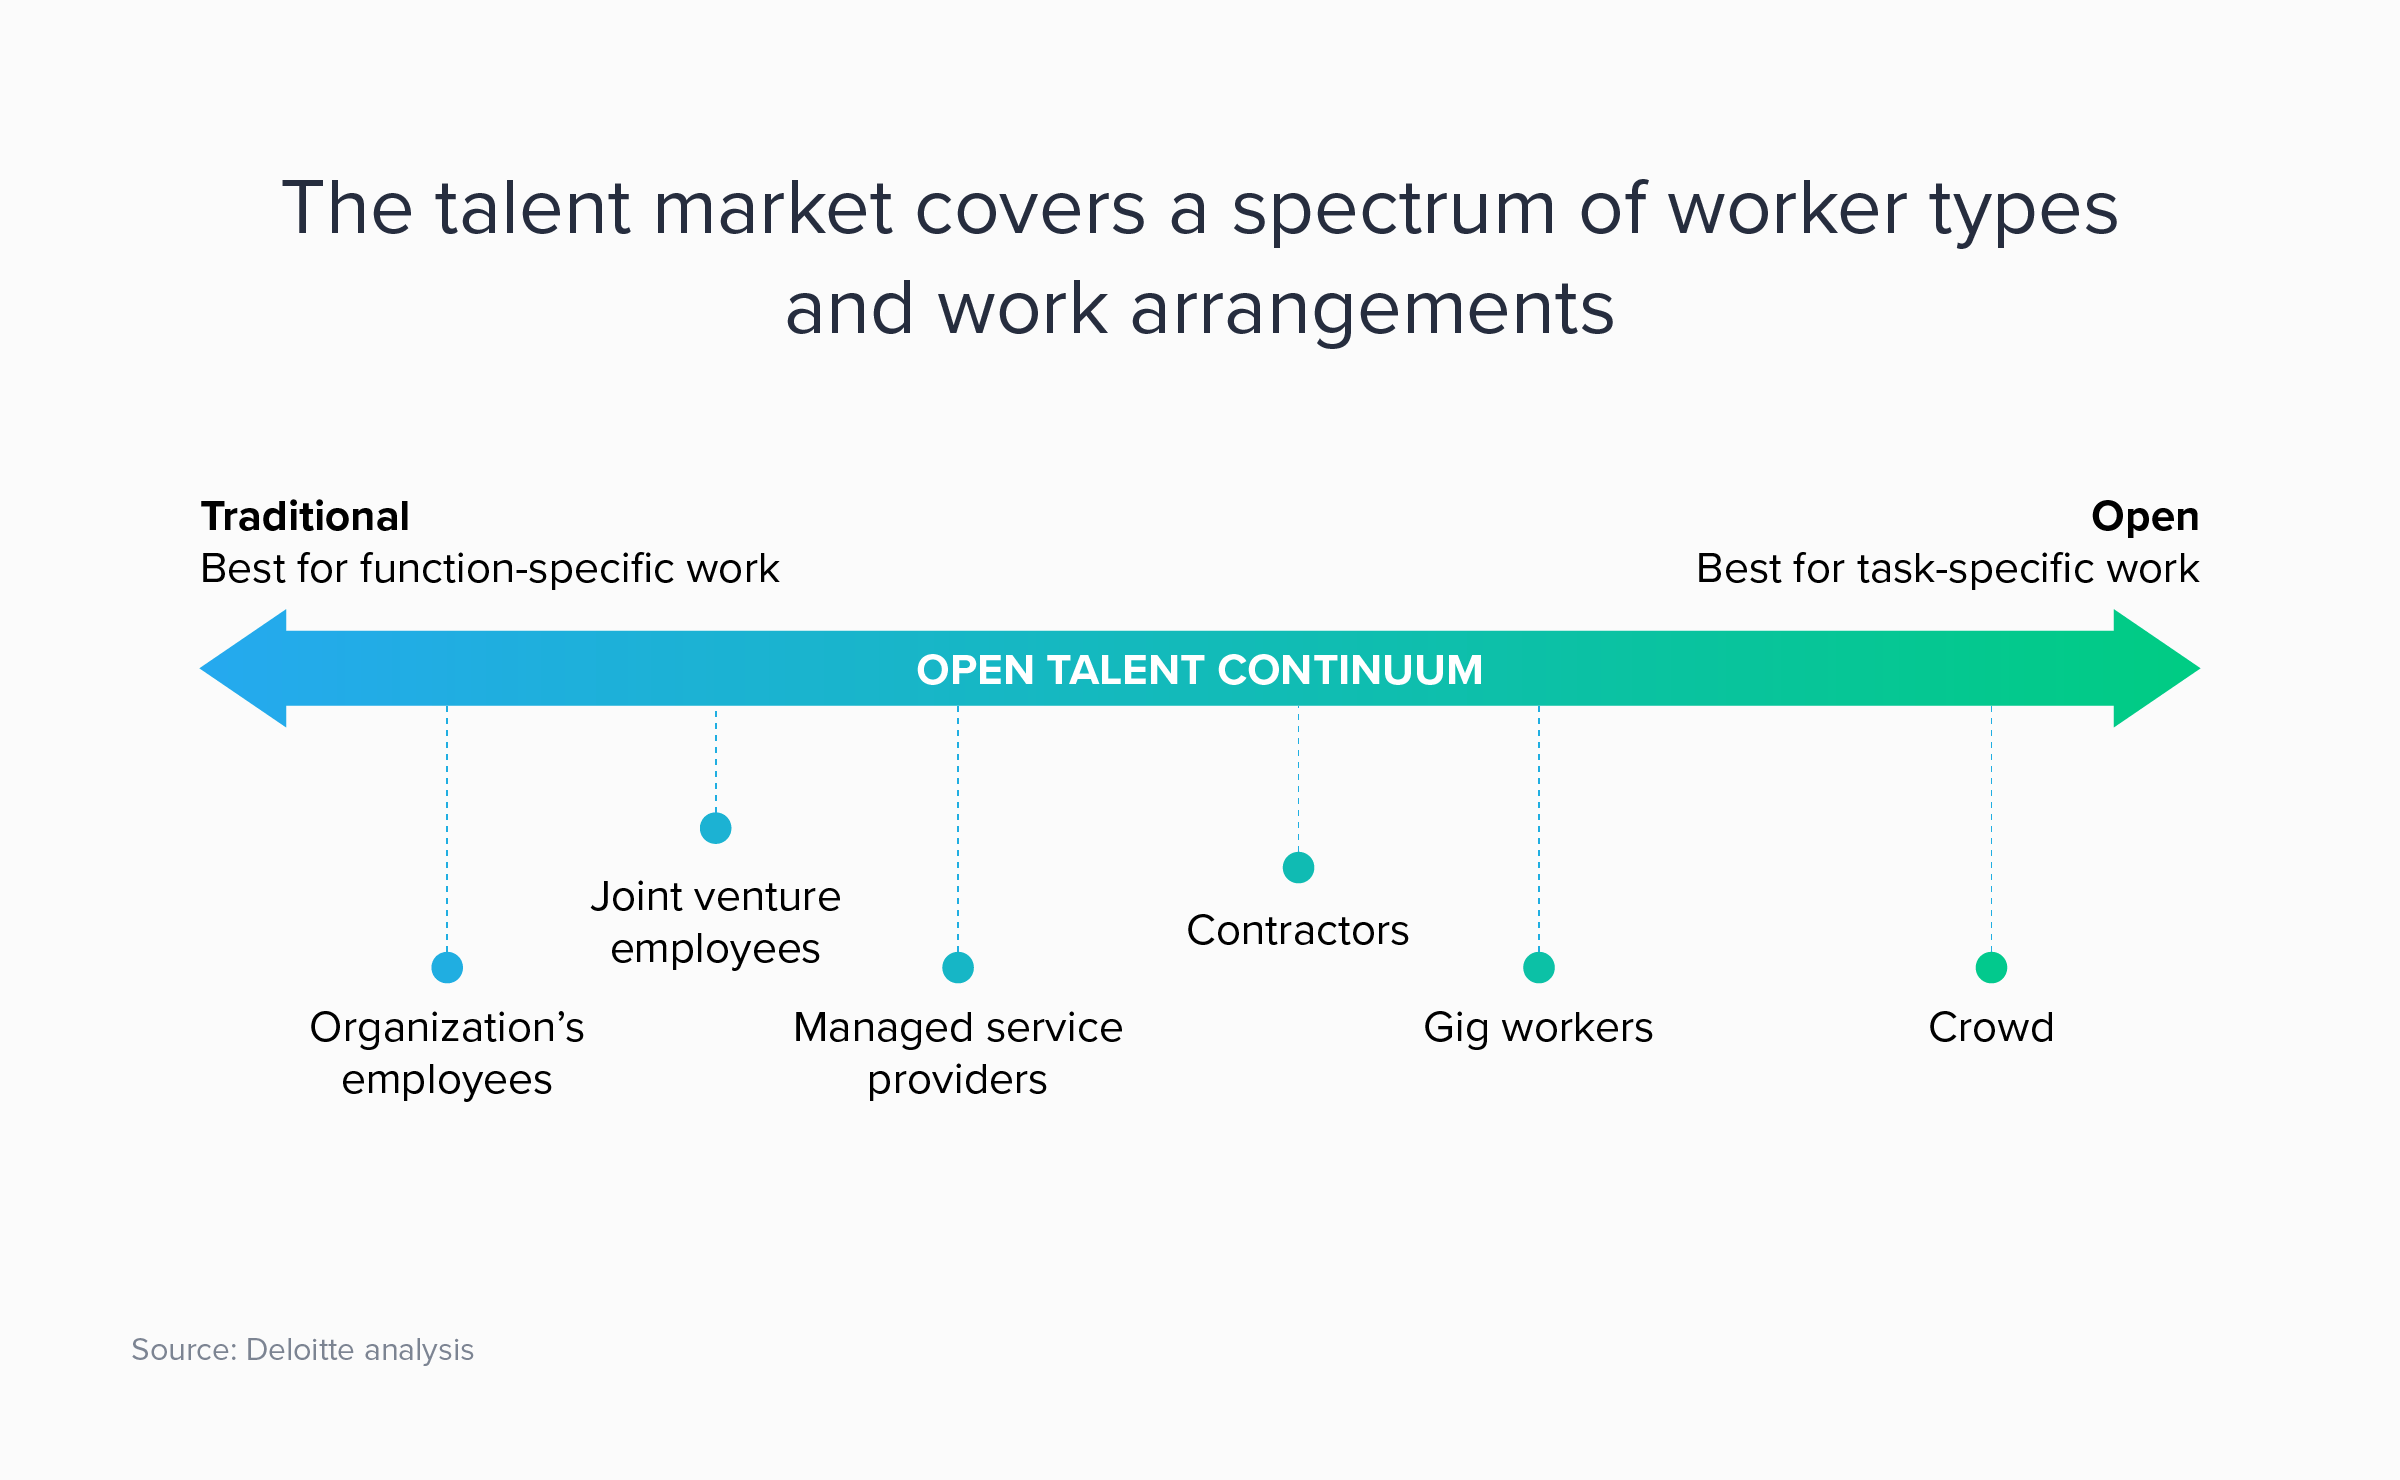 The talent market covers a spectrum of worker types, from traditional to open arrangements.